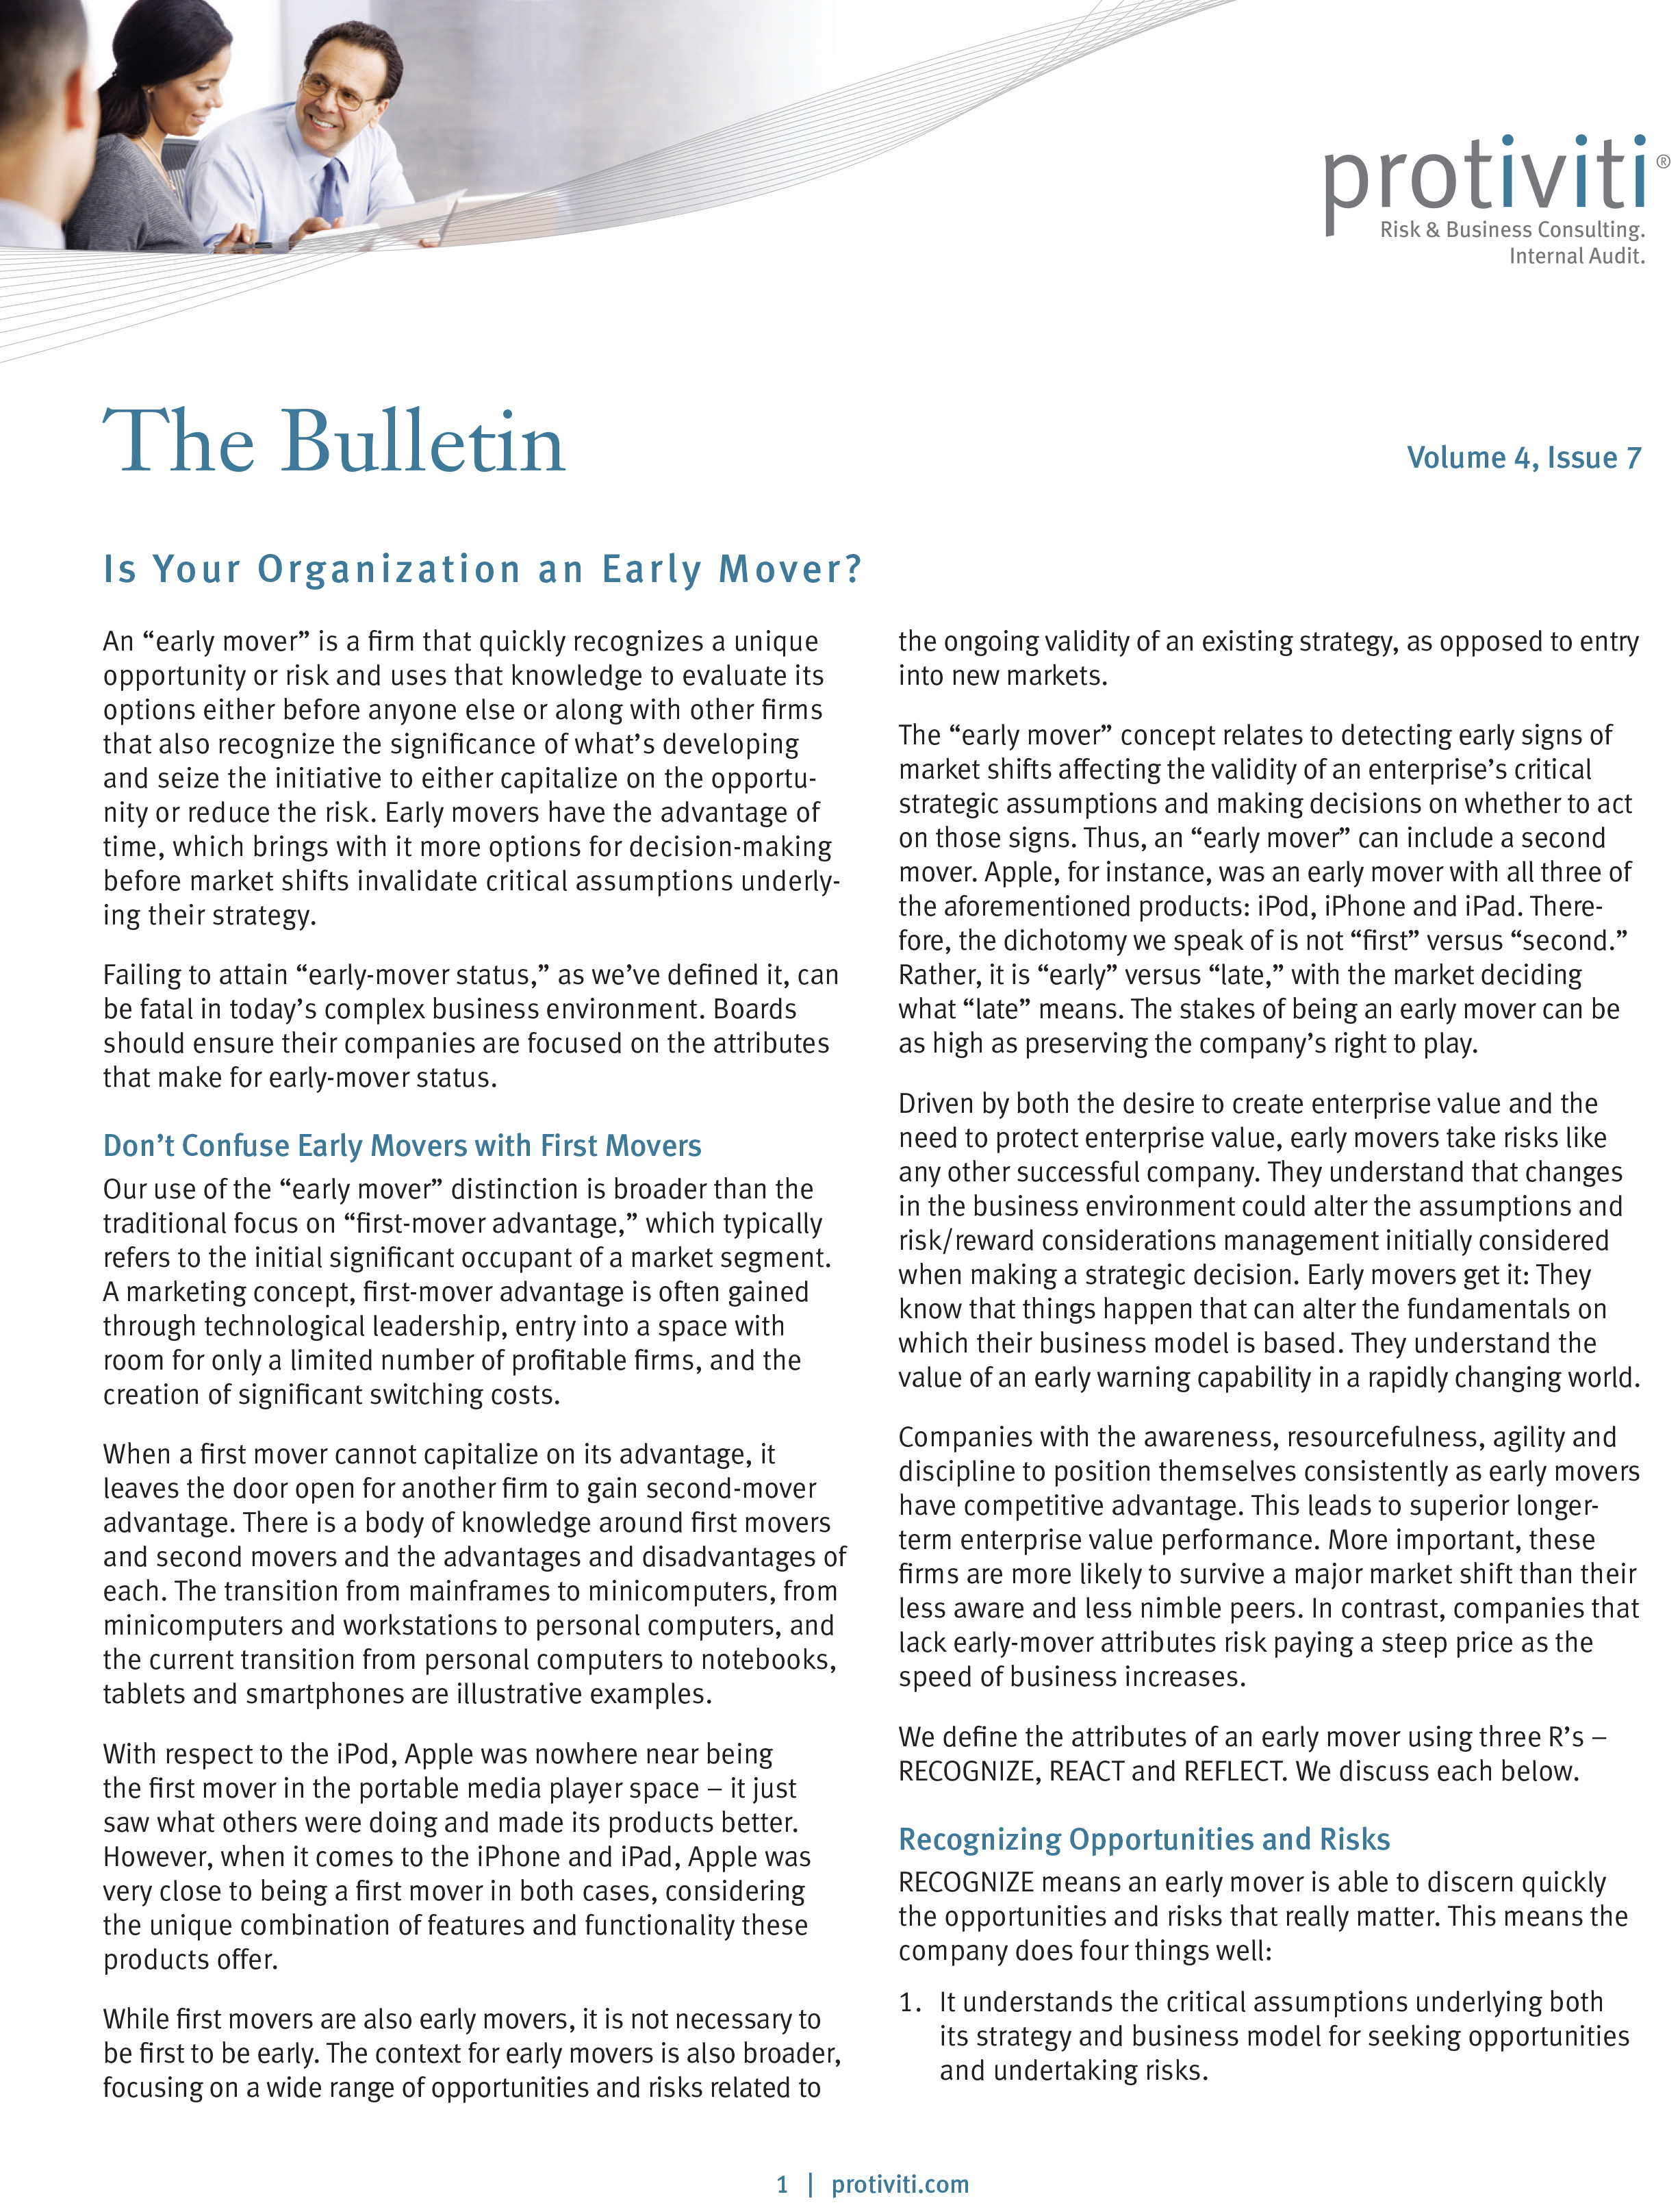 Screenshot of the first page of Is Your Organization an Early Mover - The Bulletin, Volume 4, Issue 7